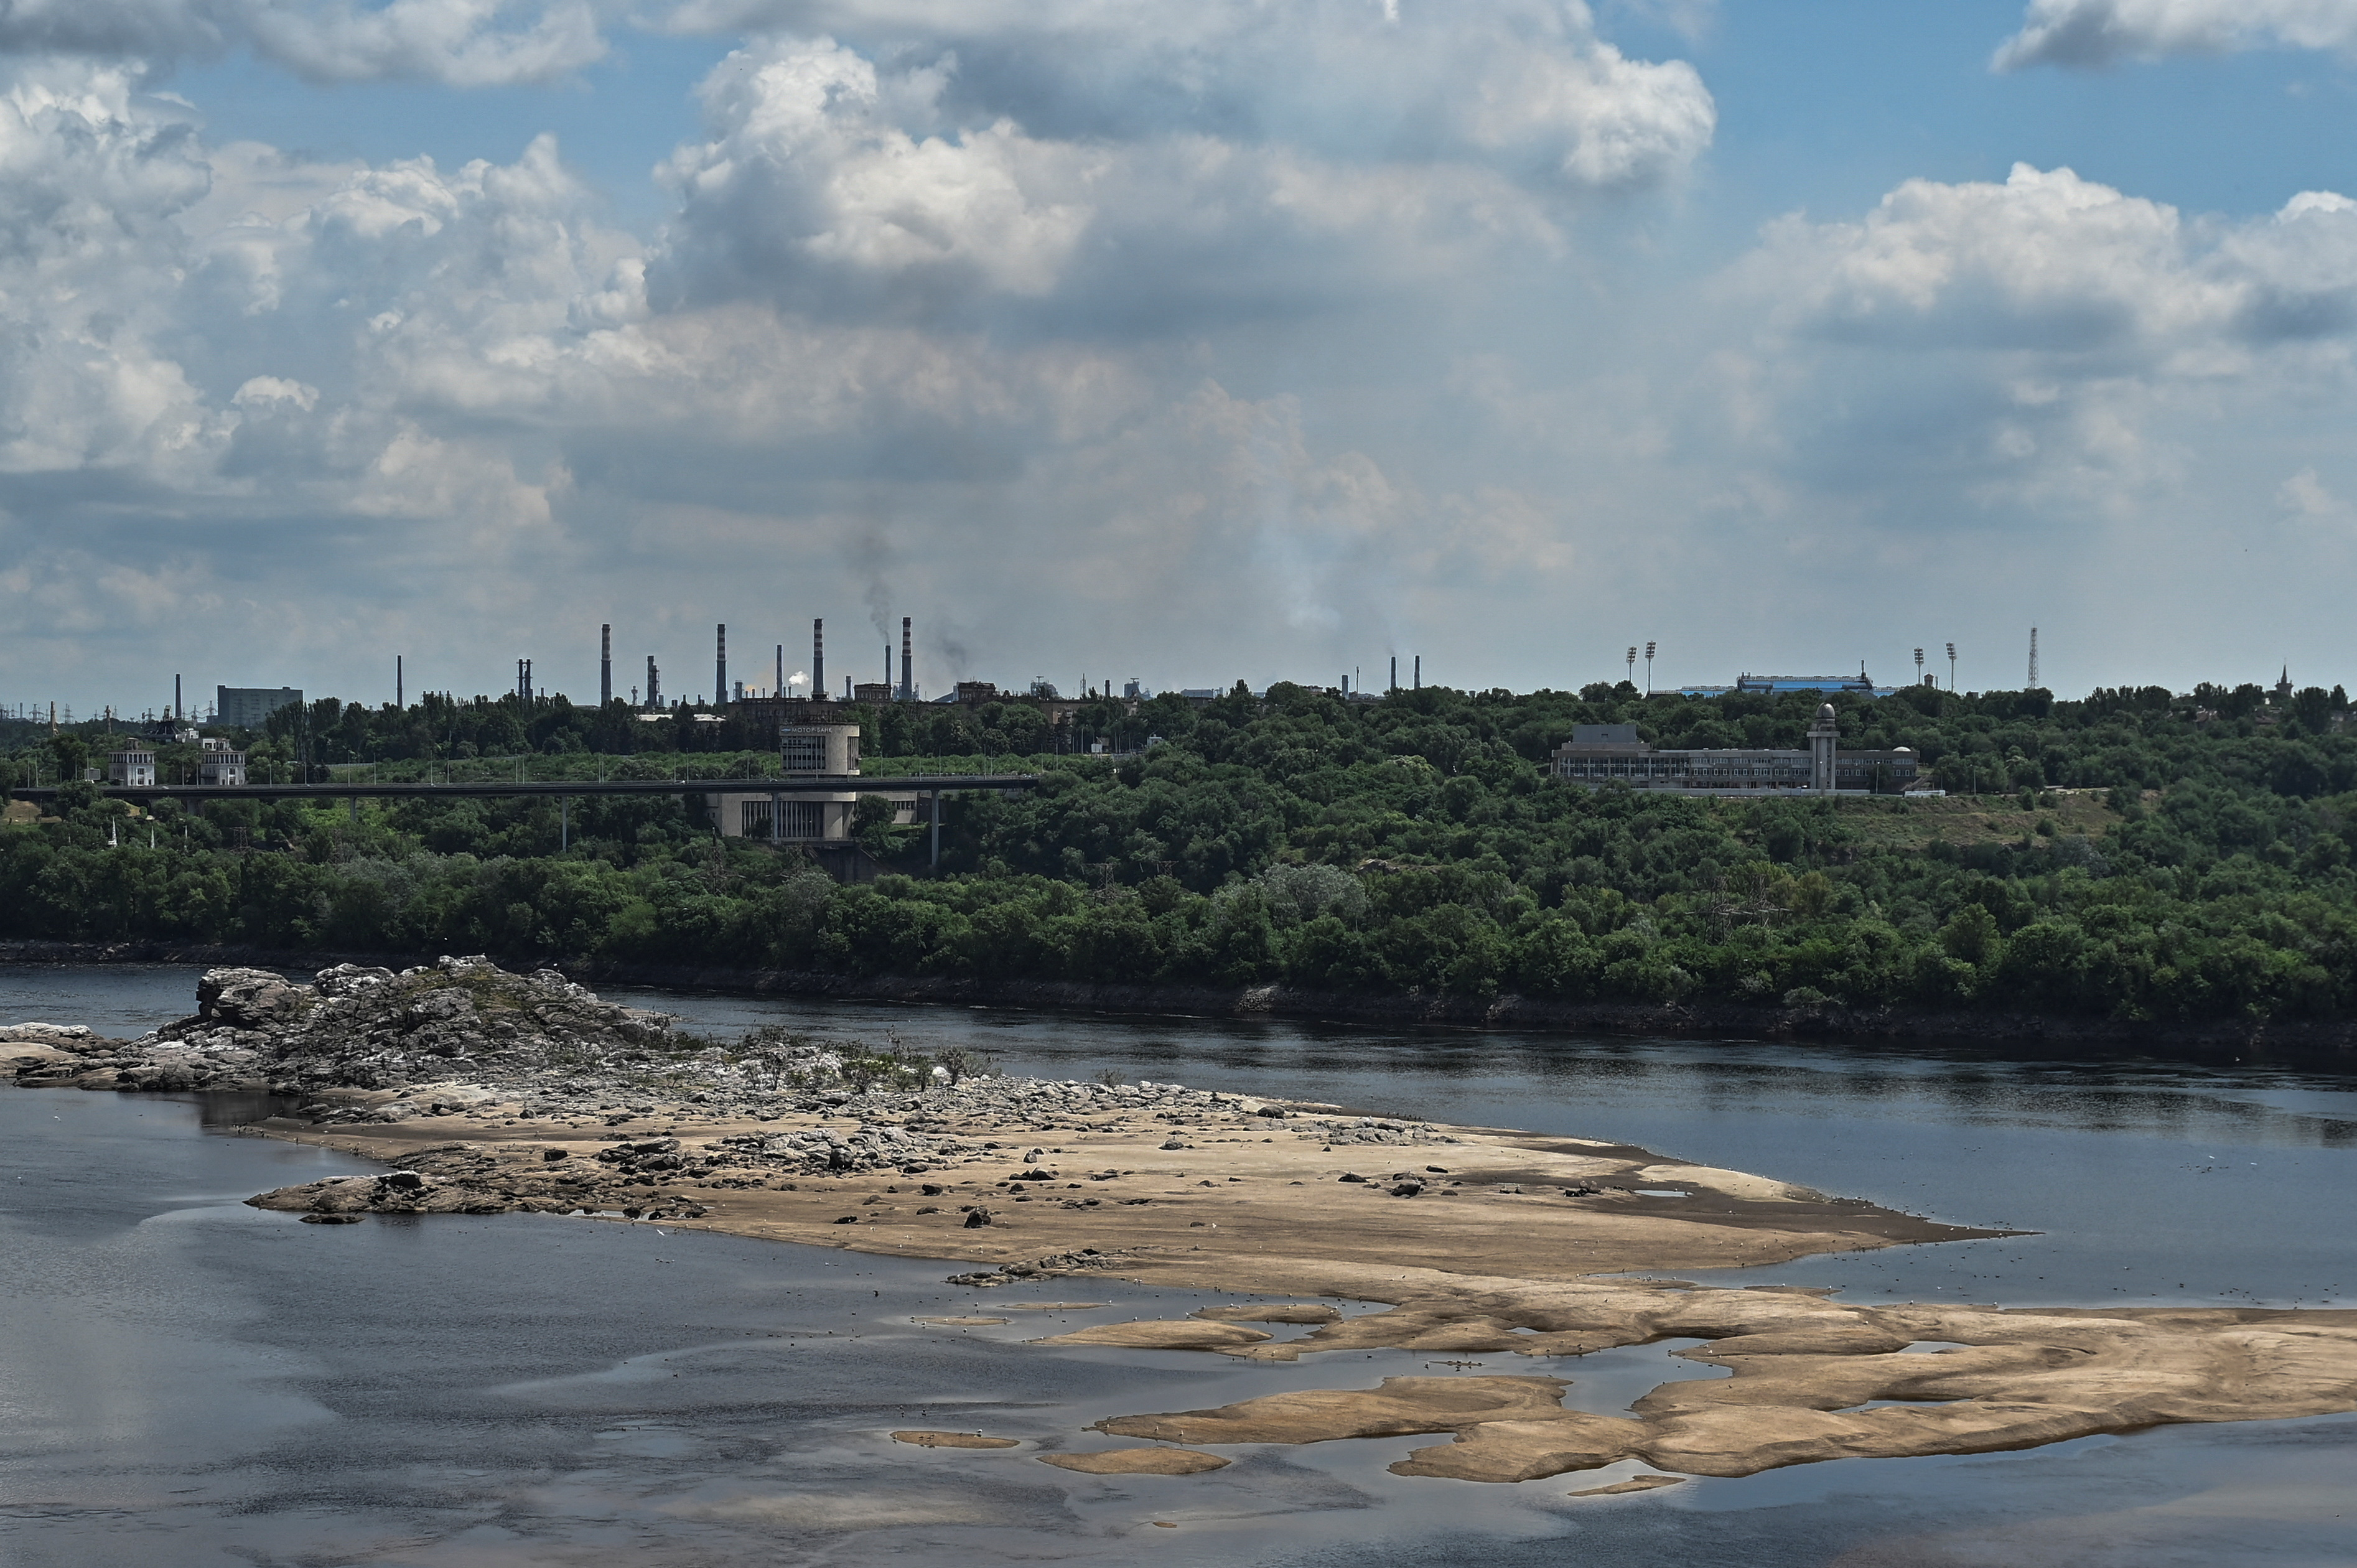 View shows the city skyline and a rocky island in the Dnipro river which became visible again after water level sharply dropped following Kakhovka dam destruction, in Zaporizhzhia